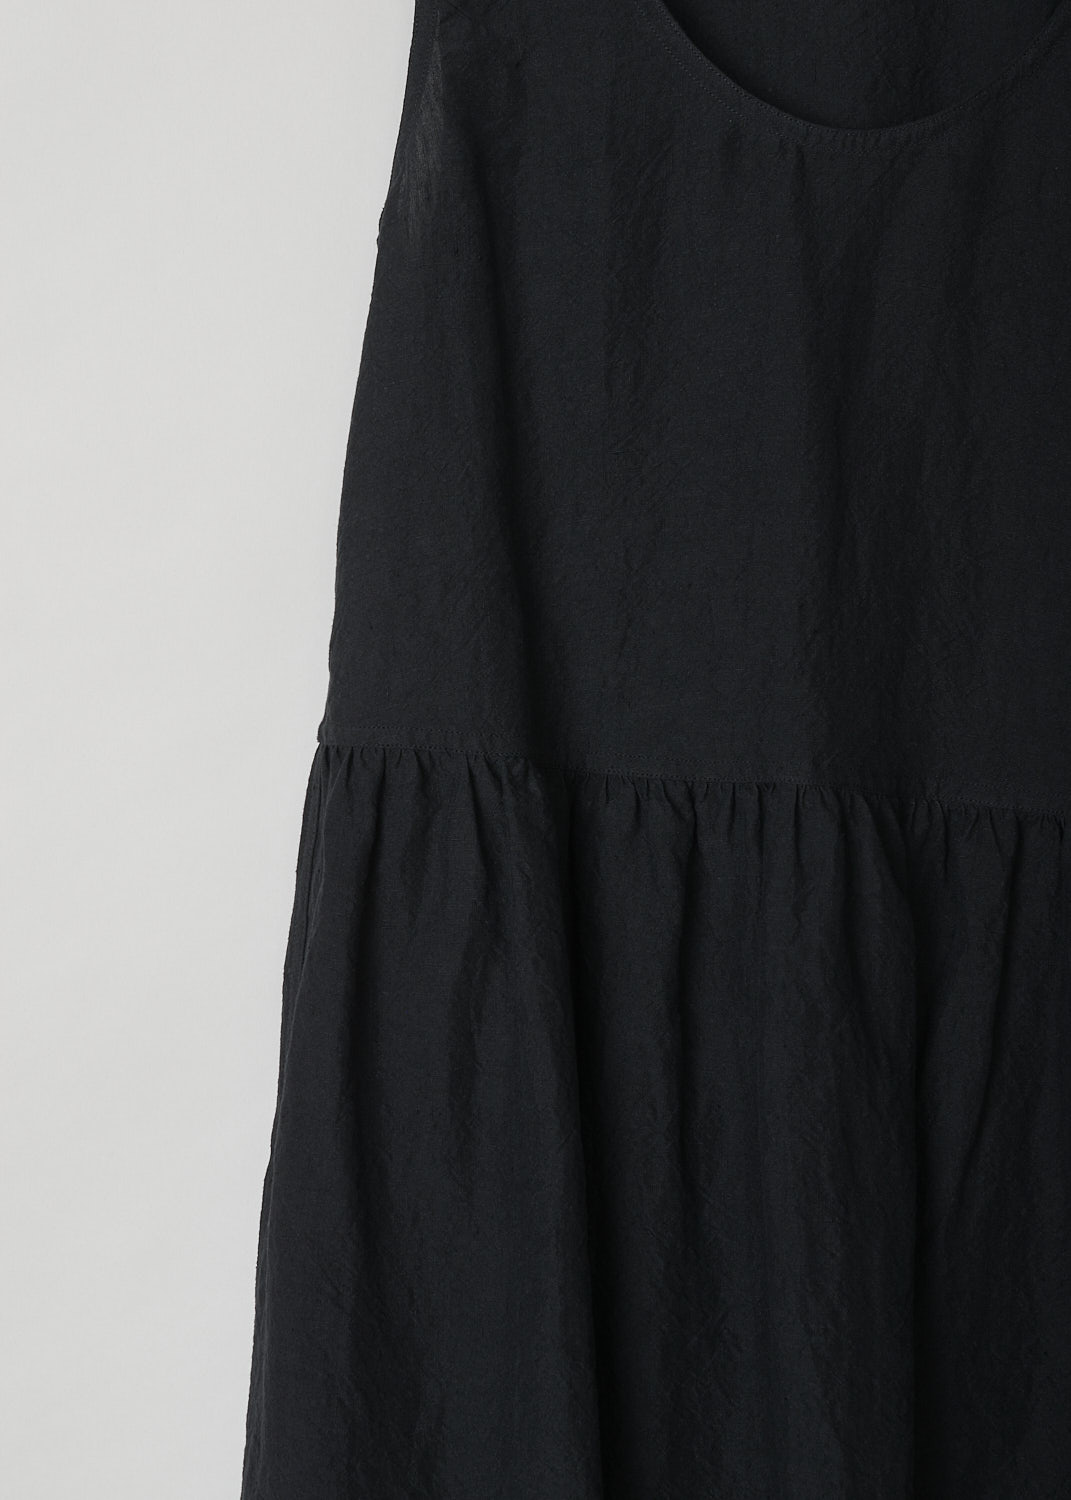 SOFIE Dâ€™HOORE, BLACK LINEN DANDLE DRESS, DANDLE_LIFE_BLACK, Black, Detail, This black sleeveless dress has U-neckline. The dress has a wide A-line silhouette. A straight crystal pleated hemline separates the bodice from the midi length skirt. Concealed slanted pockets can be found in the side seam. 
